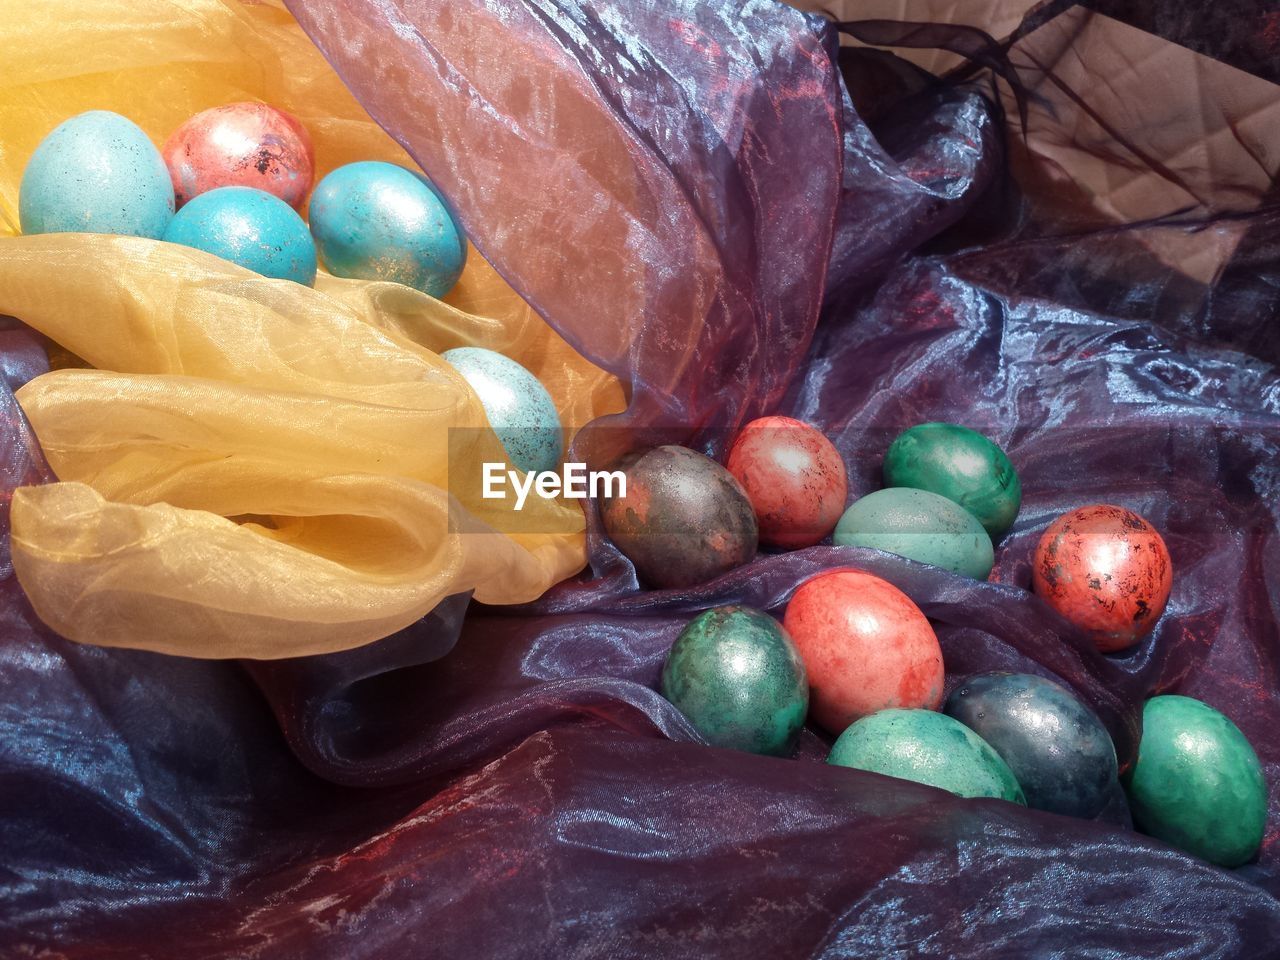 Close-up of easter eggs on colorful fabrics